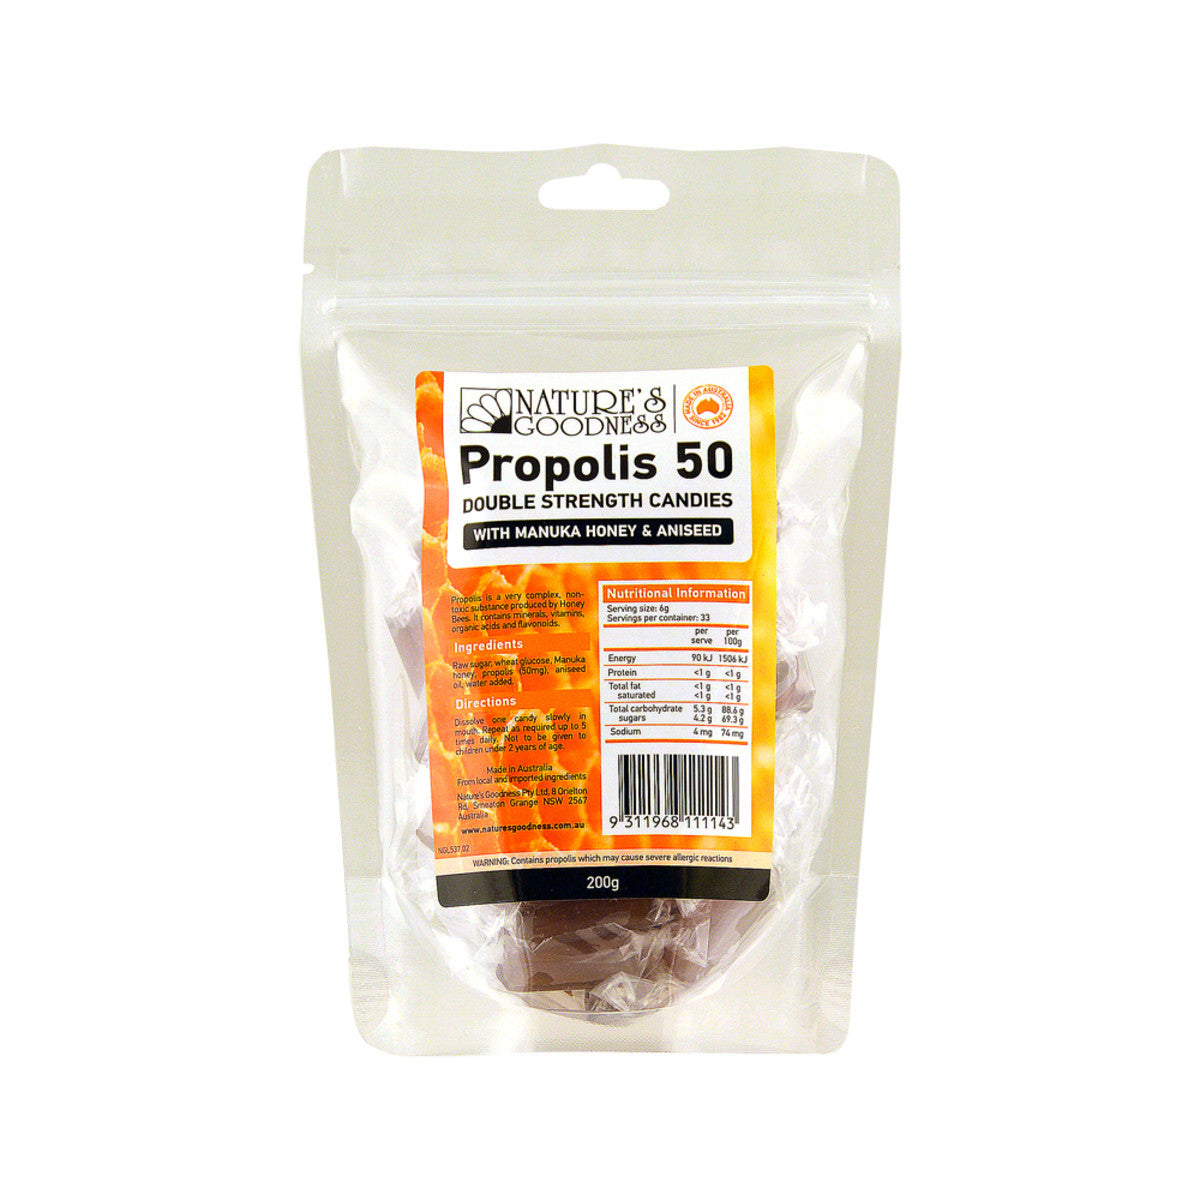 Nat Goodness Propolis Candies 50 D.Strngth Honey Aniseed 200g